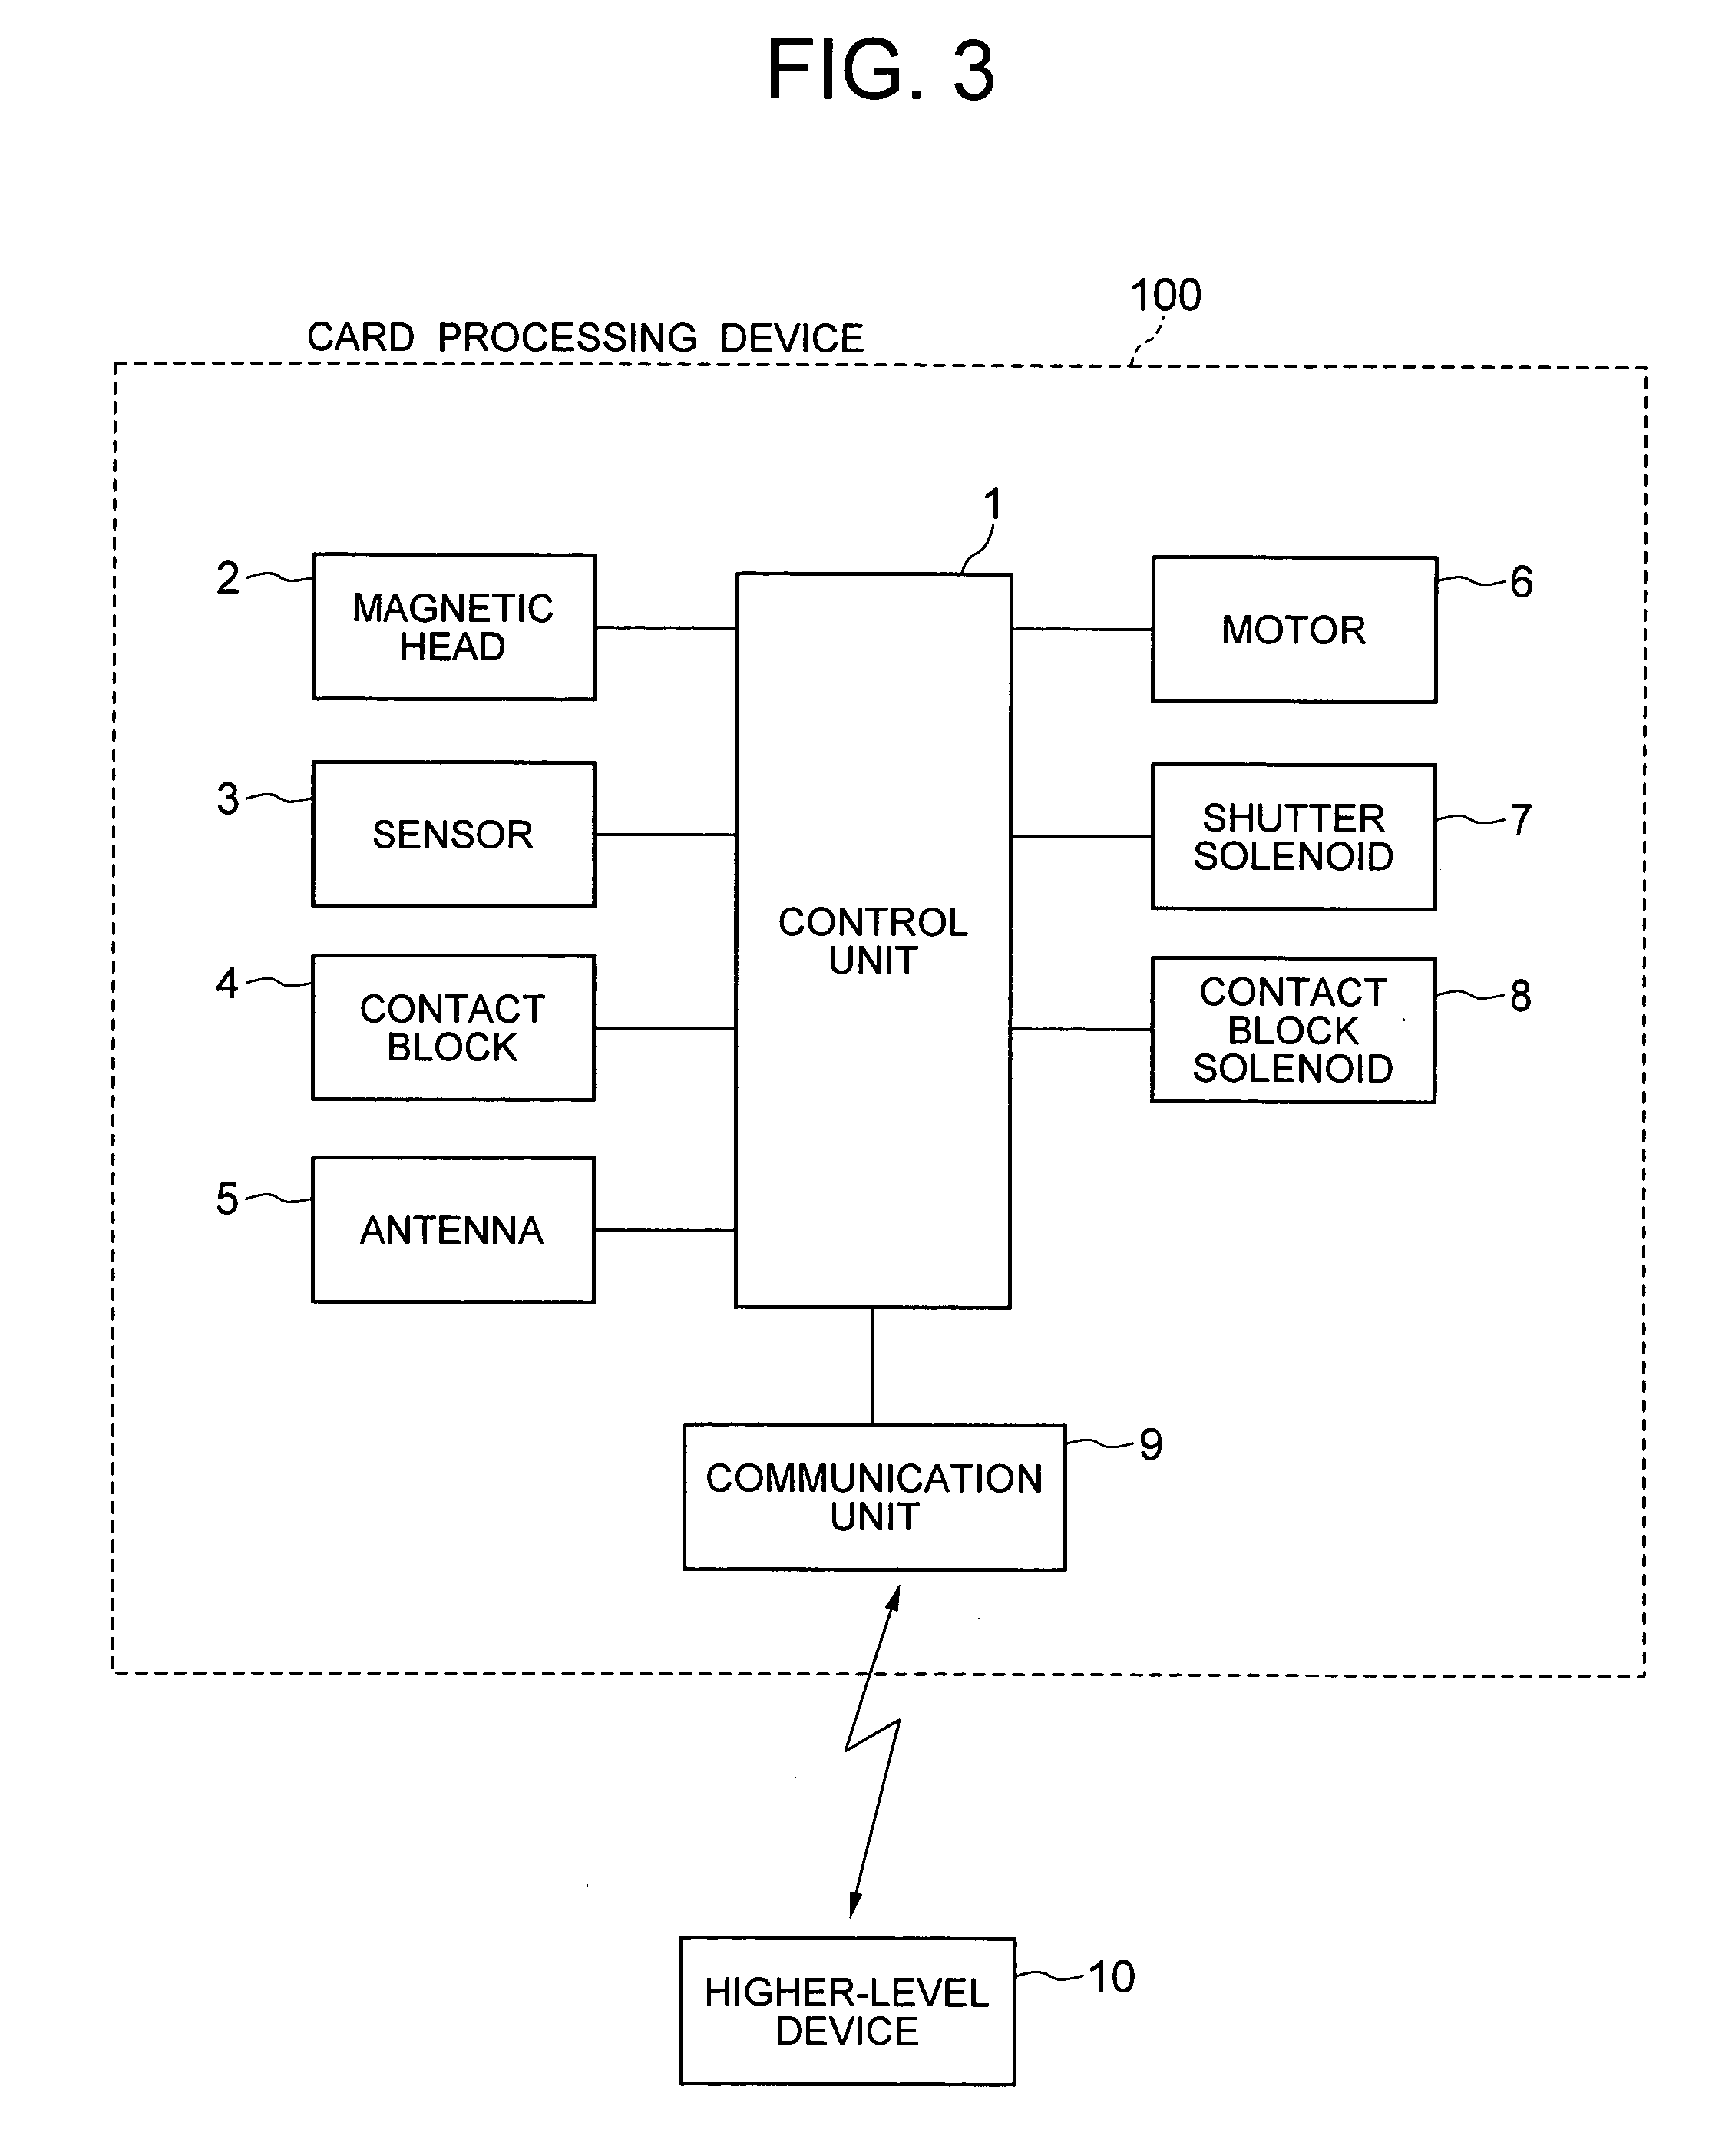 Card processing device